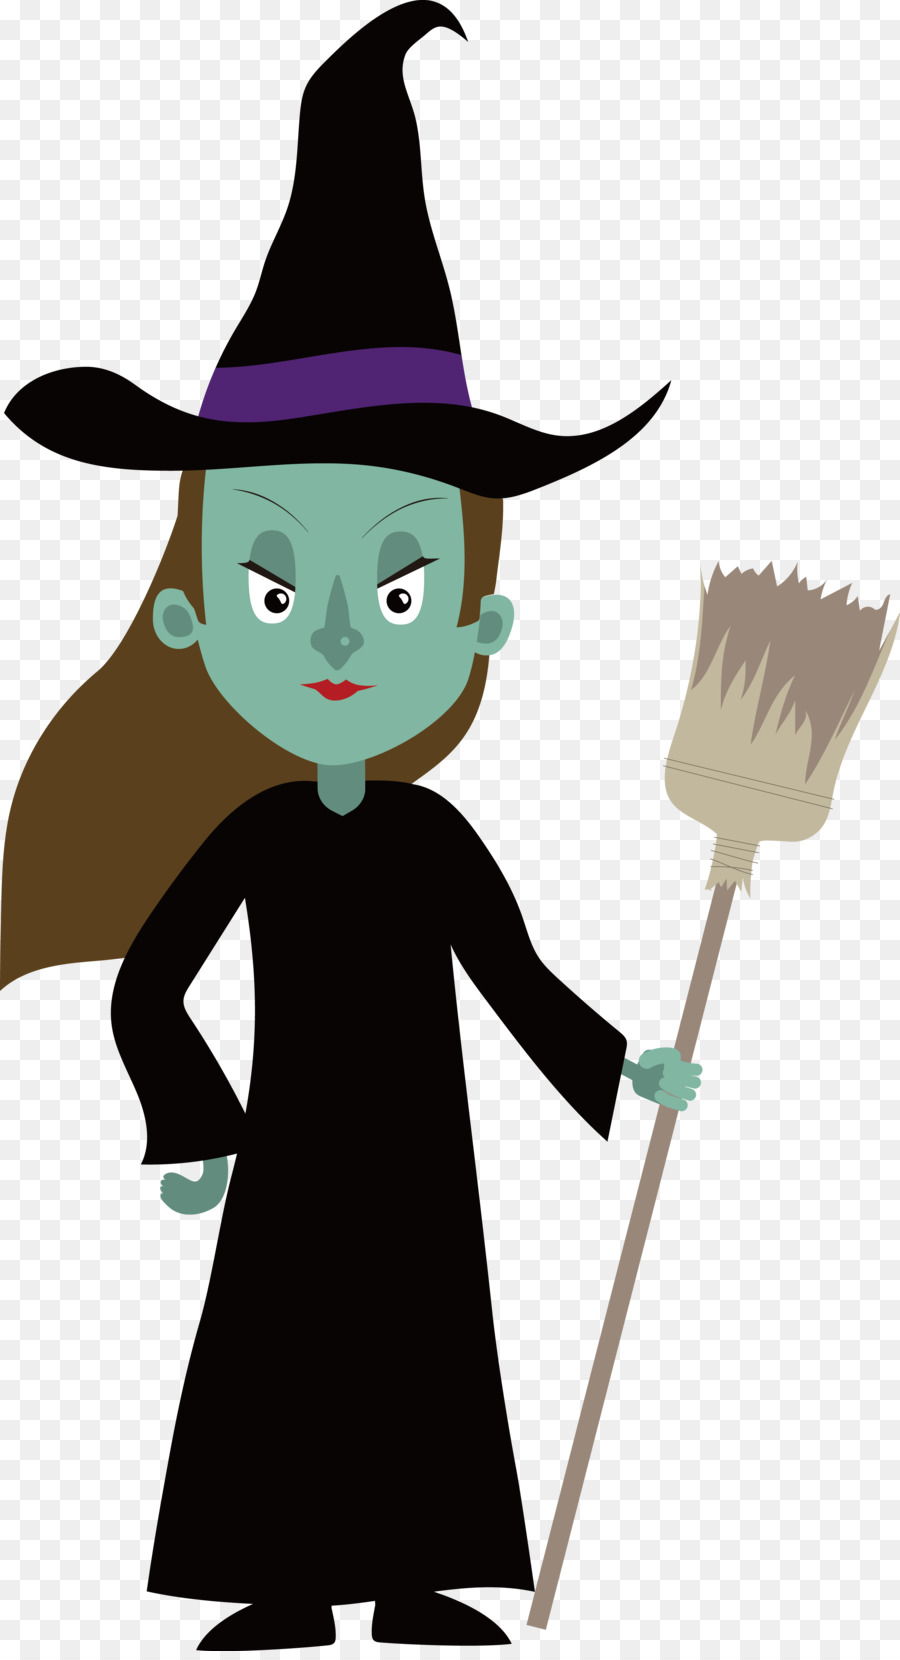 Boszorkxe1ny Disguise Halloween Illustration - Black Witch vector png download - 2883*5290 - Free Transparent Disguise png Download.